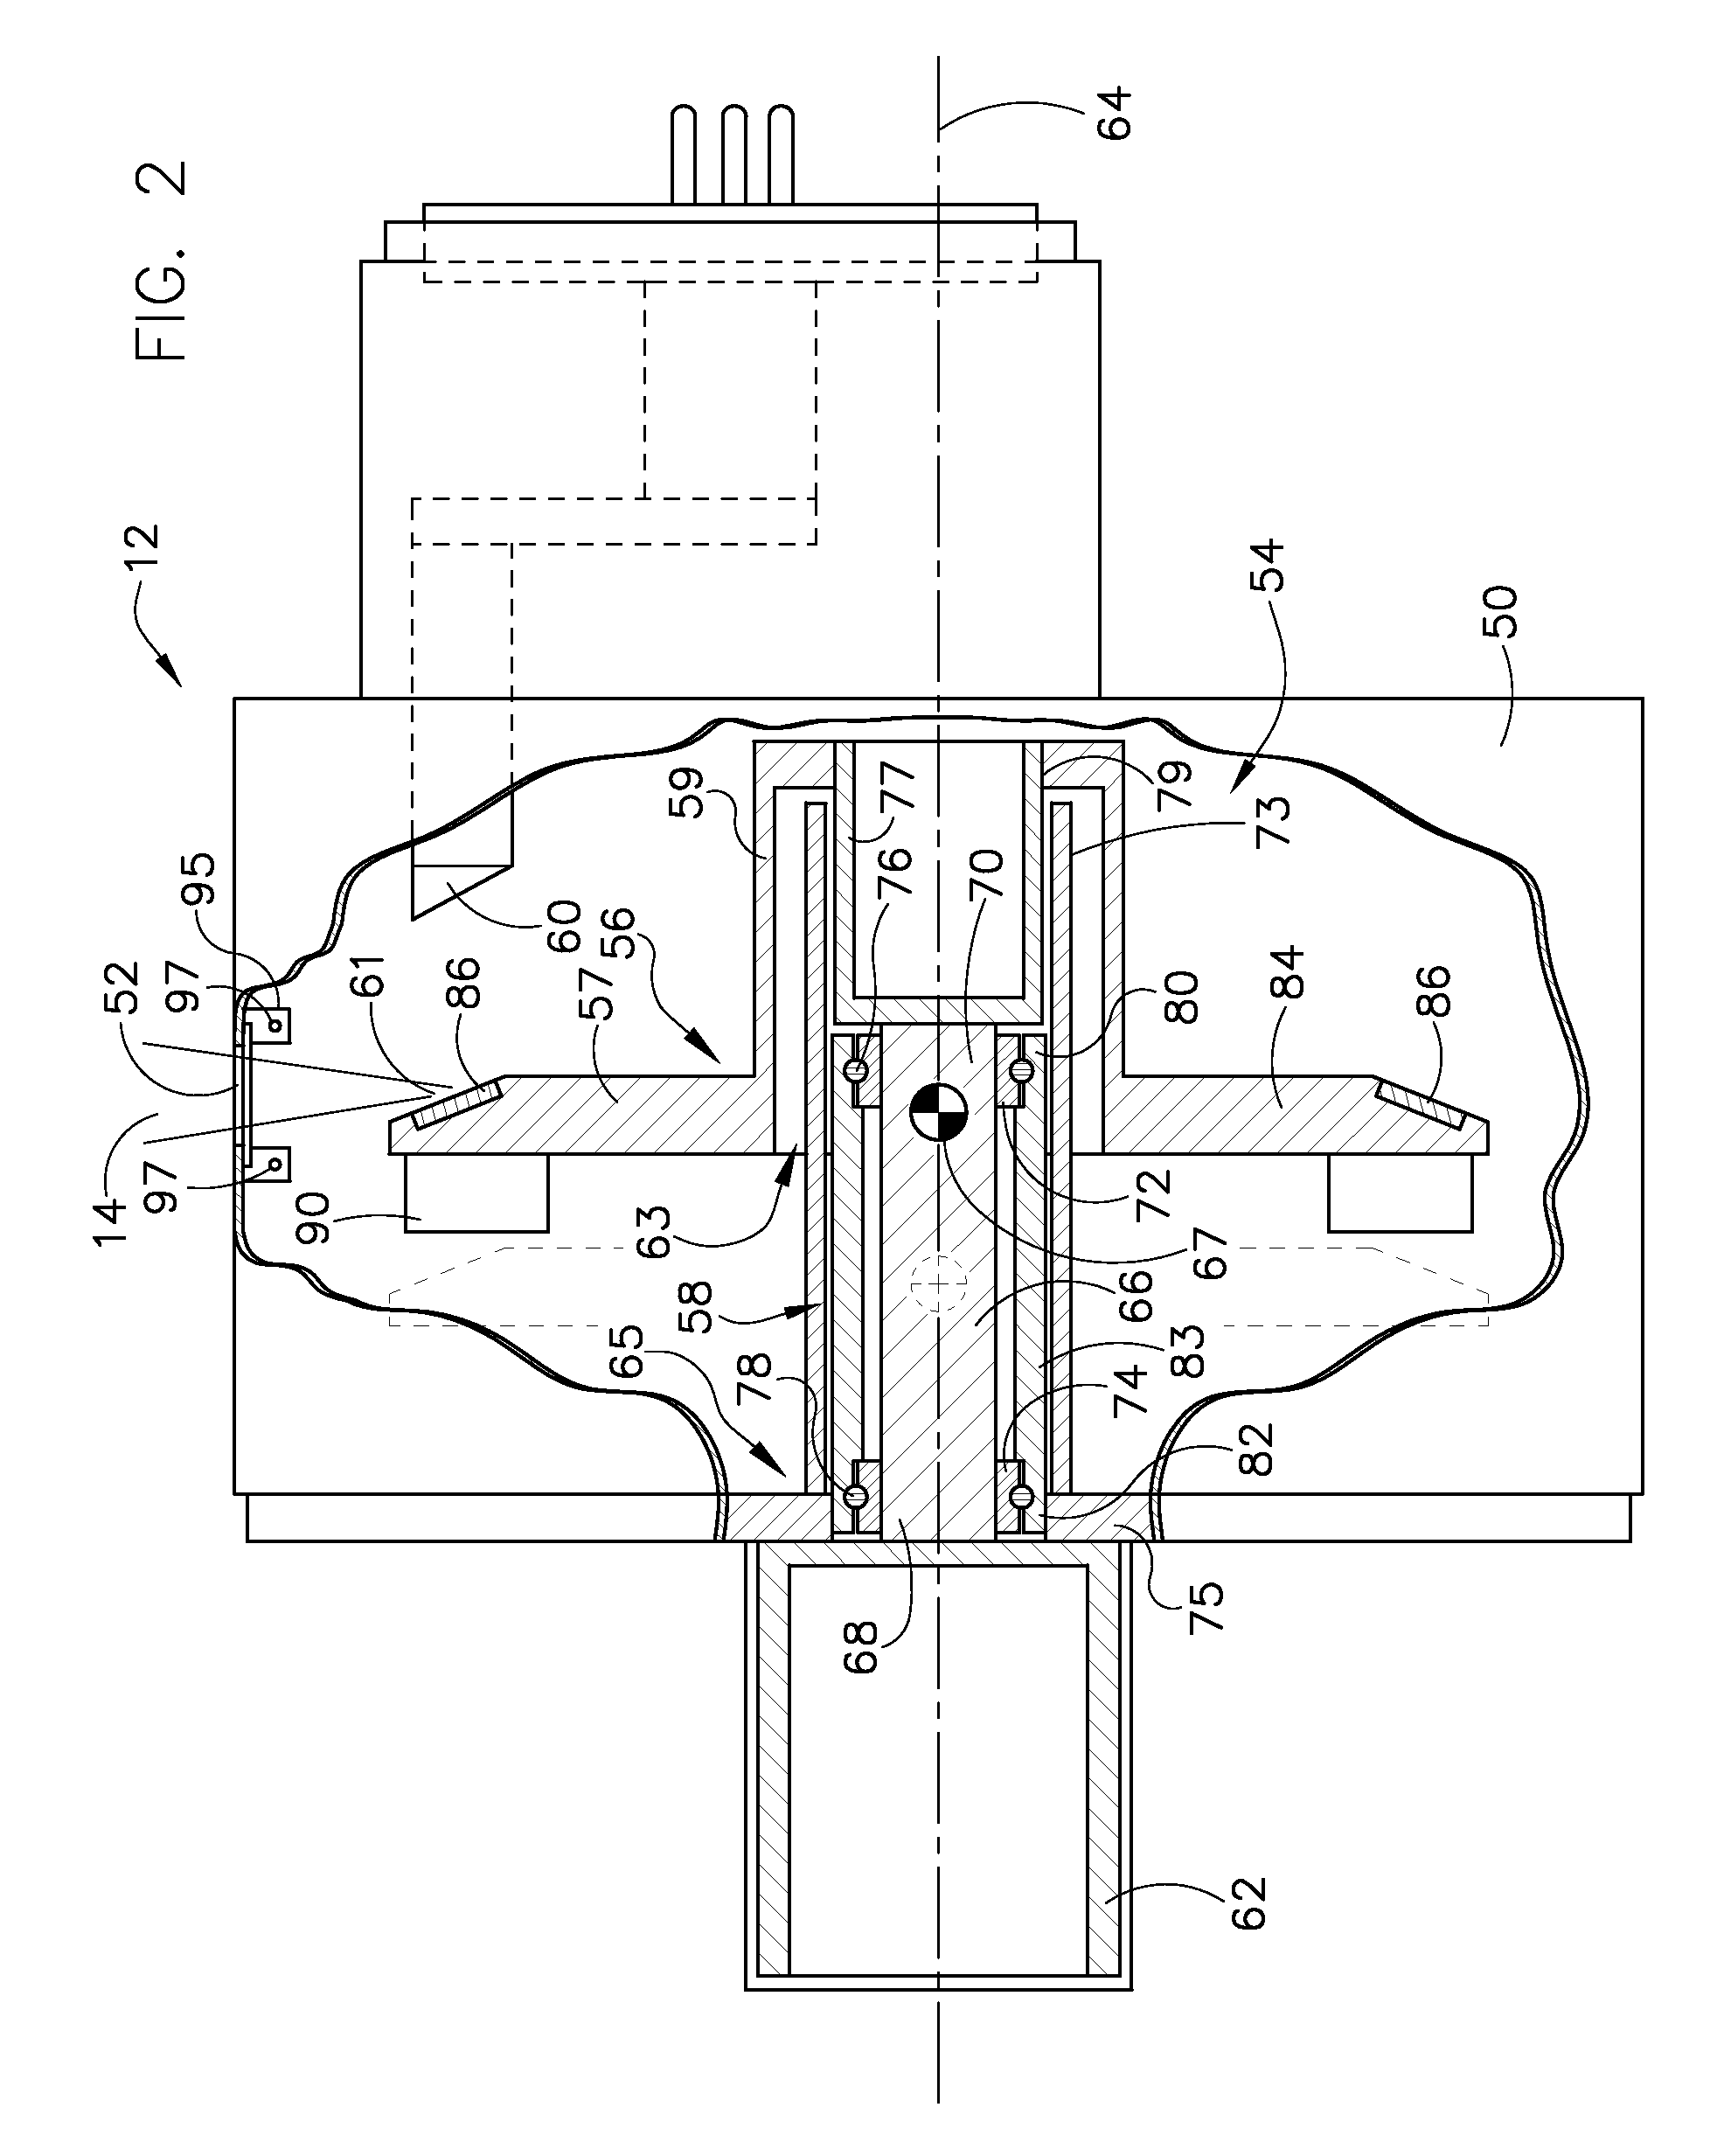 Apparatus for reducing kv-dependent artifacts in an imaging system and method of making same